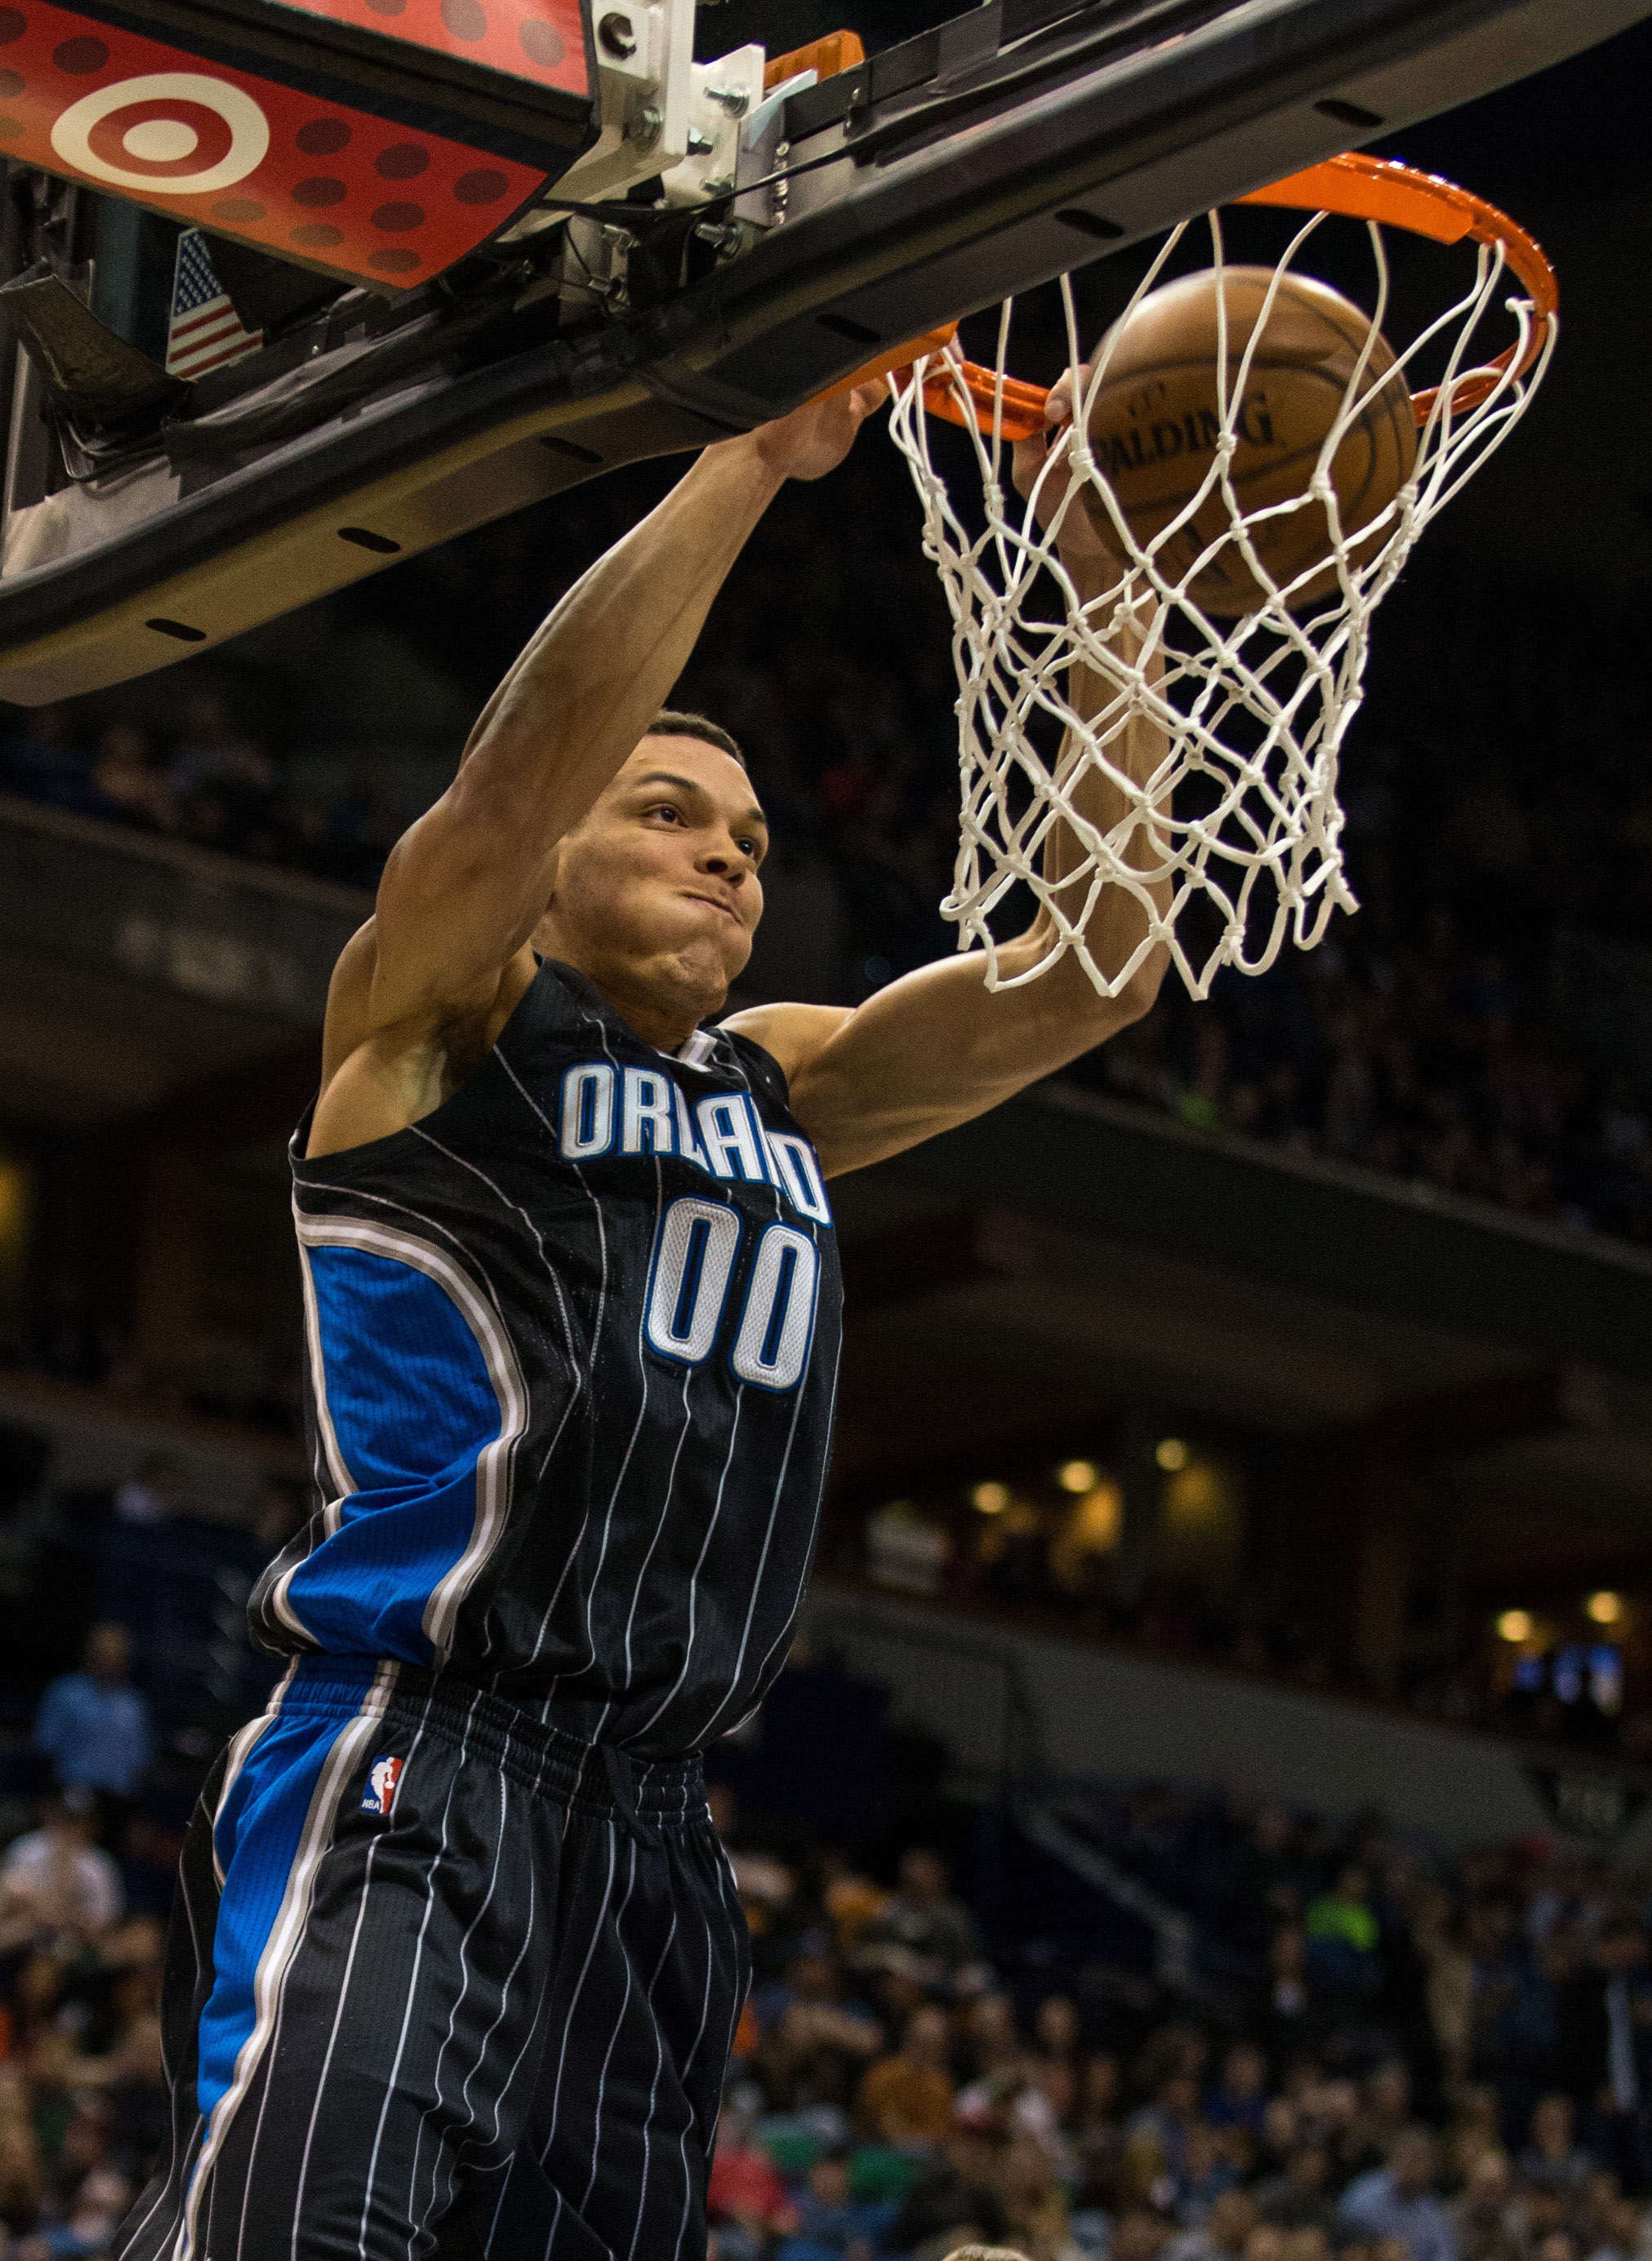 Is Aaron Gordon the next Blake Griffin? Or just another overhyped young player?